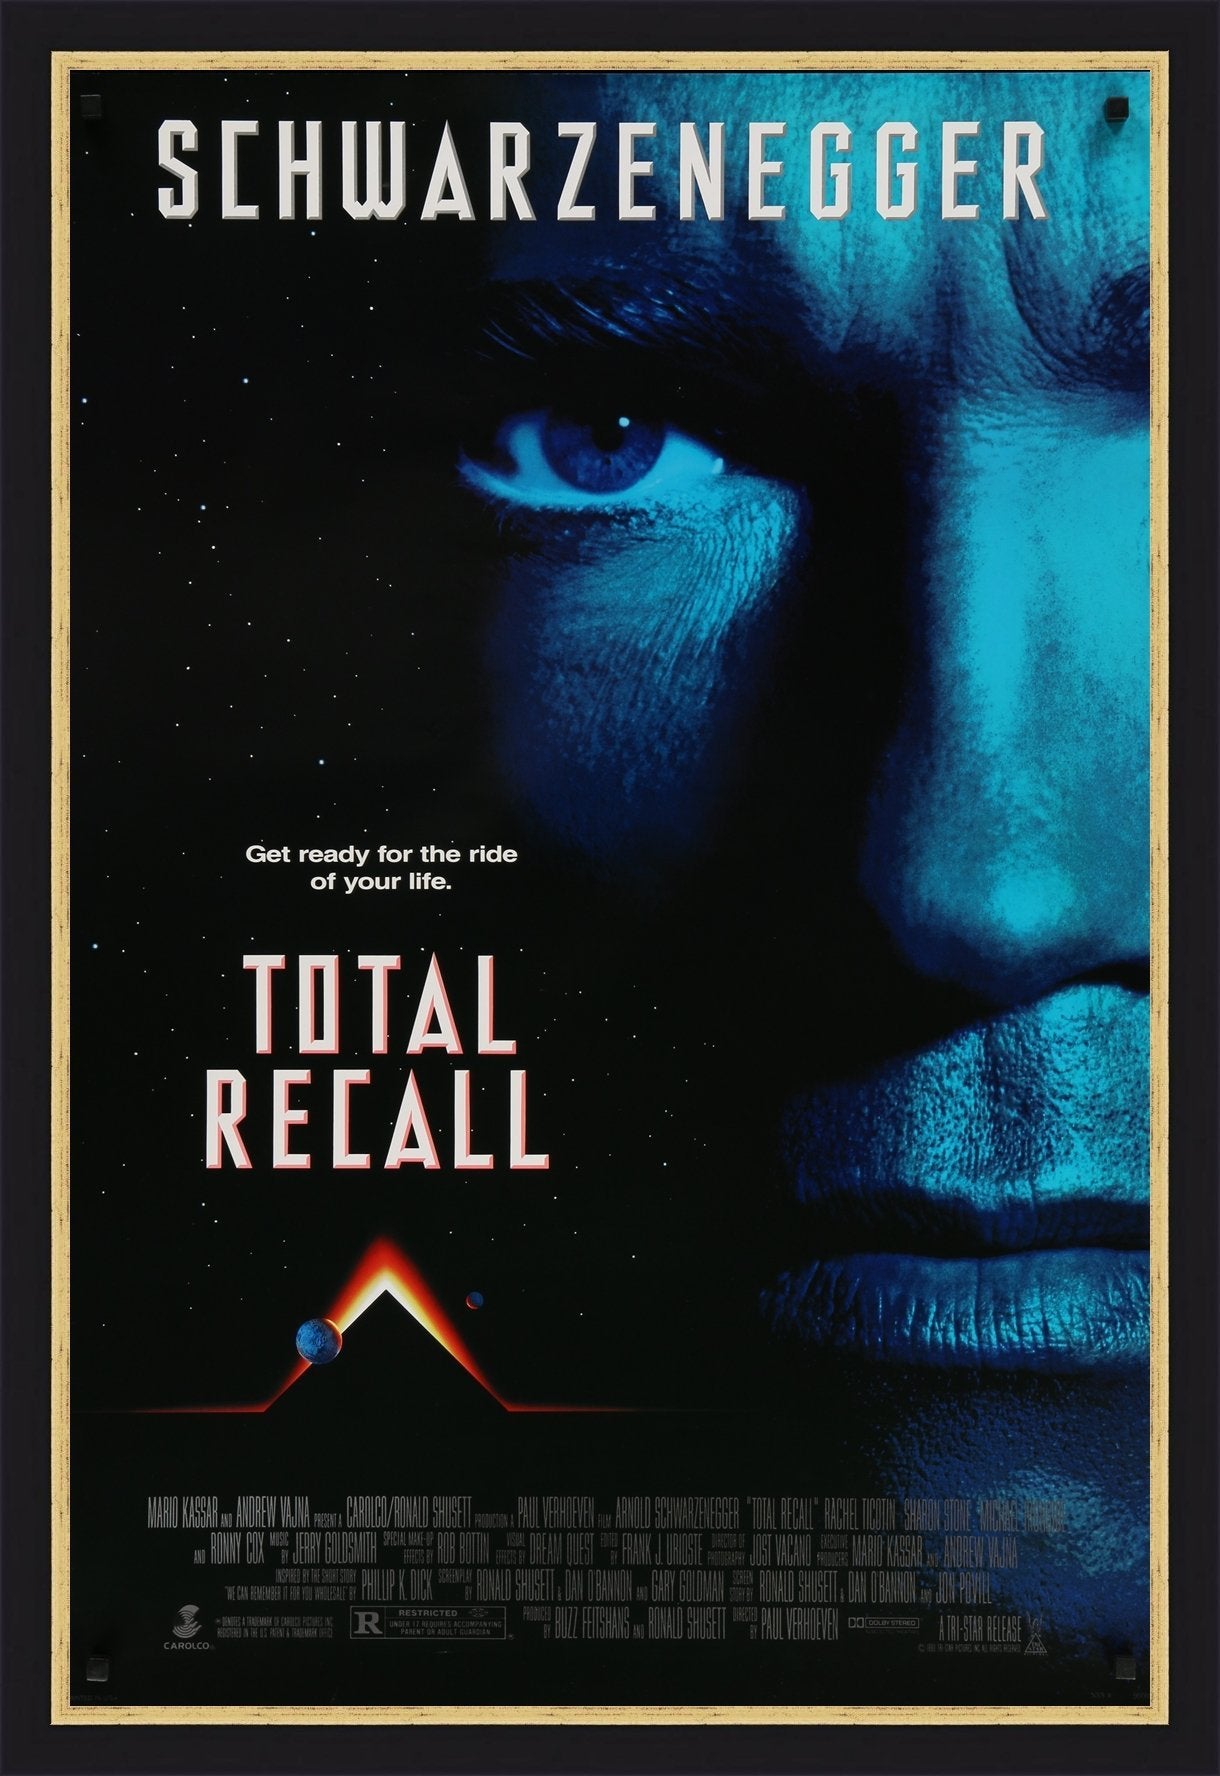 An original movie poster for the film Total Recall